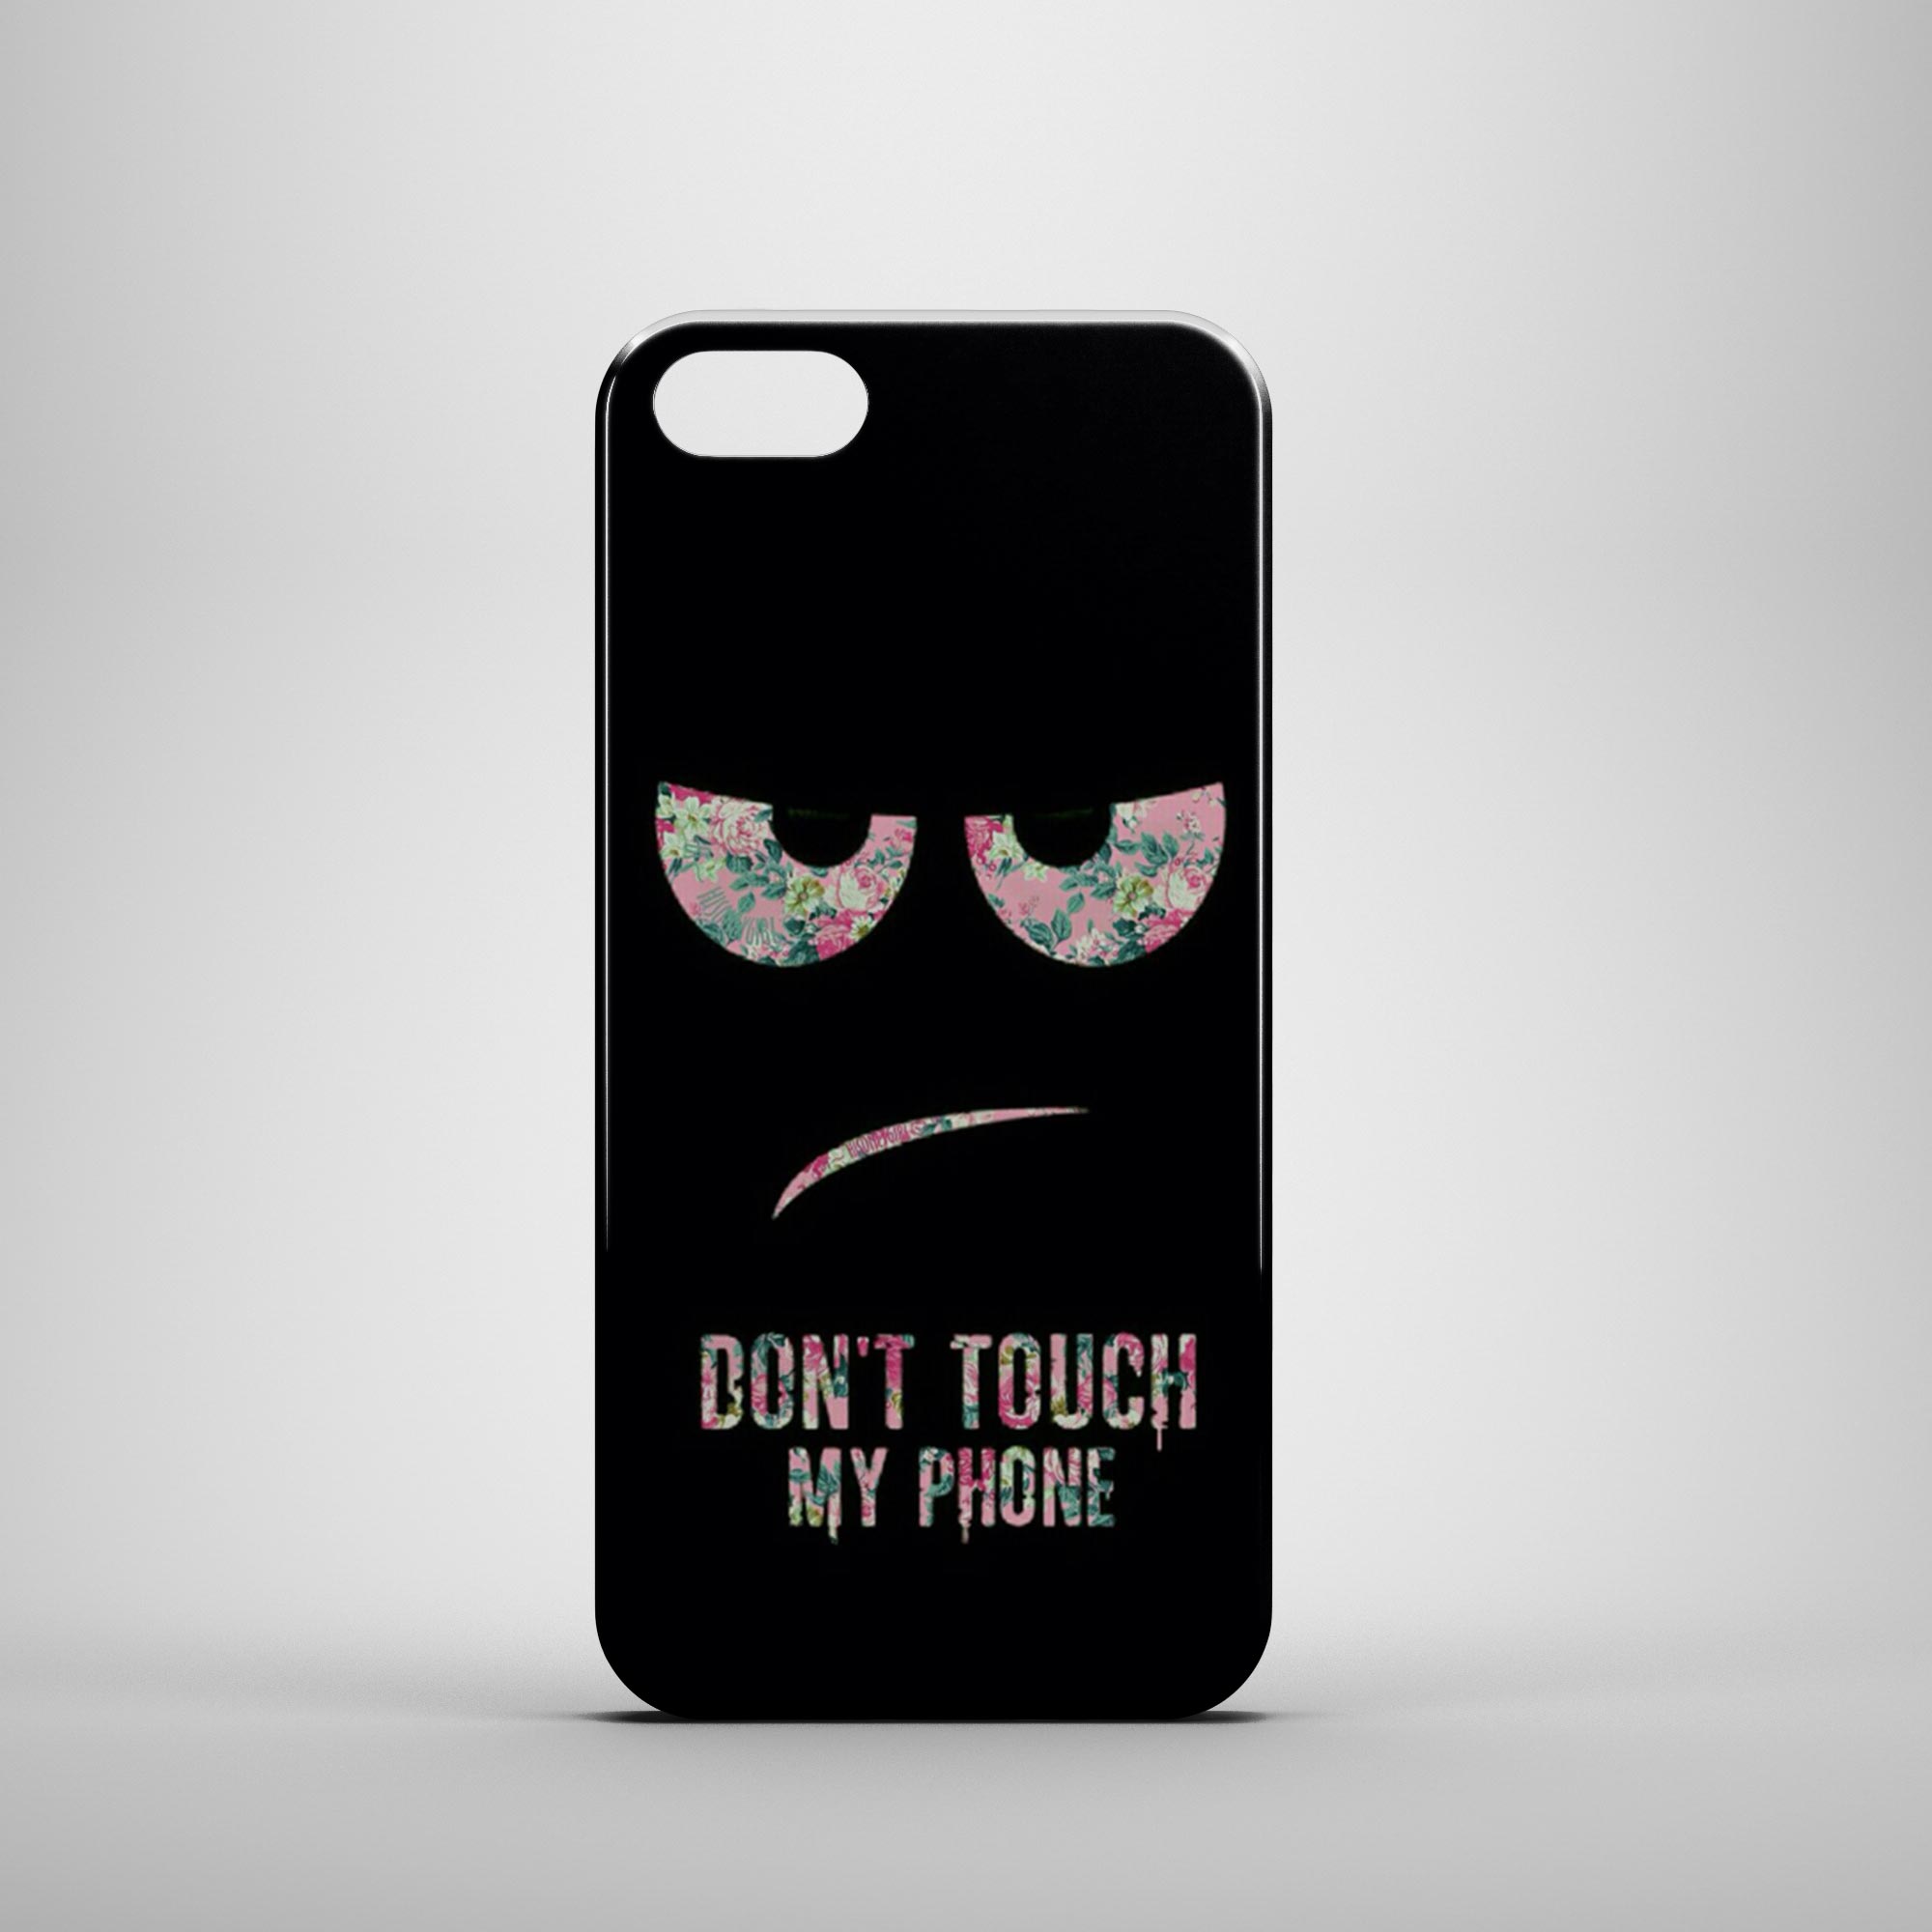 Dont Touch My Phone! Emoji Phone Cover | eBay